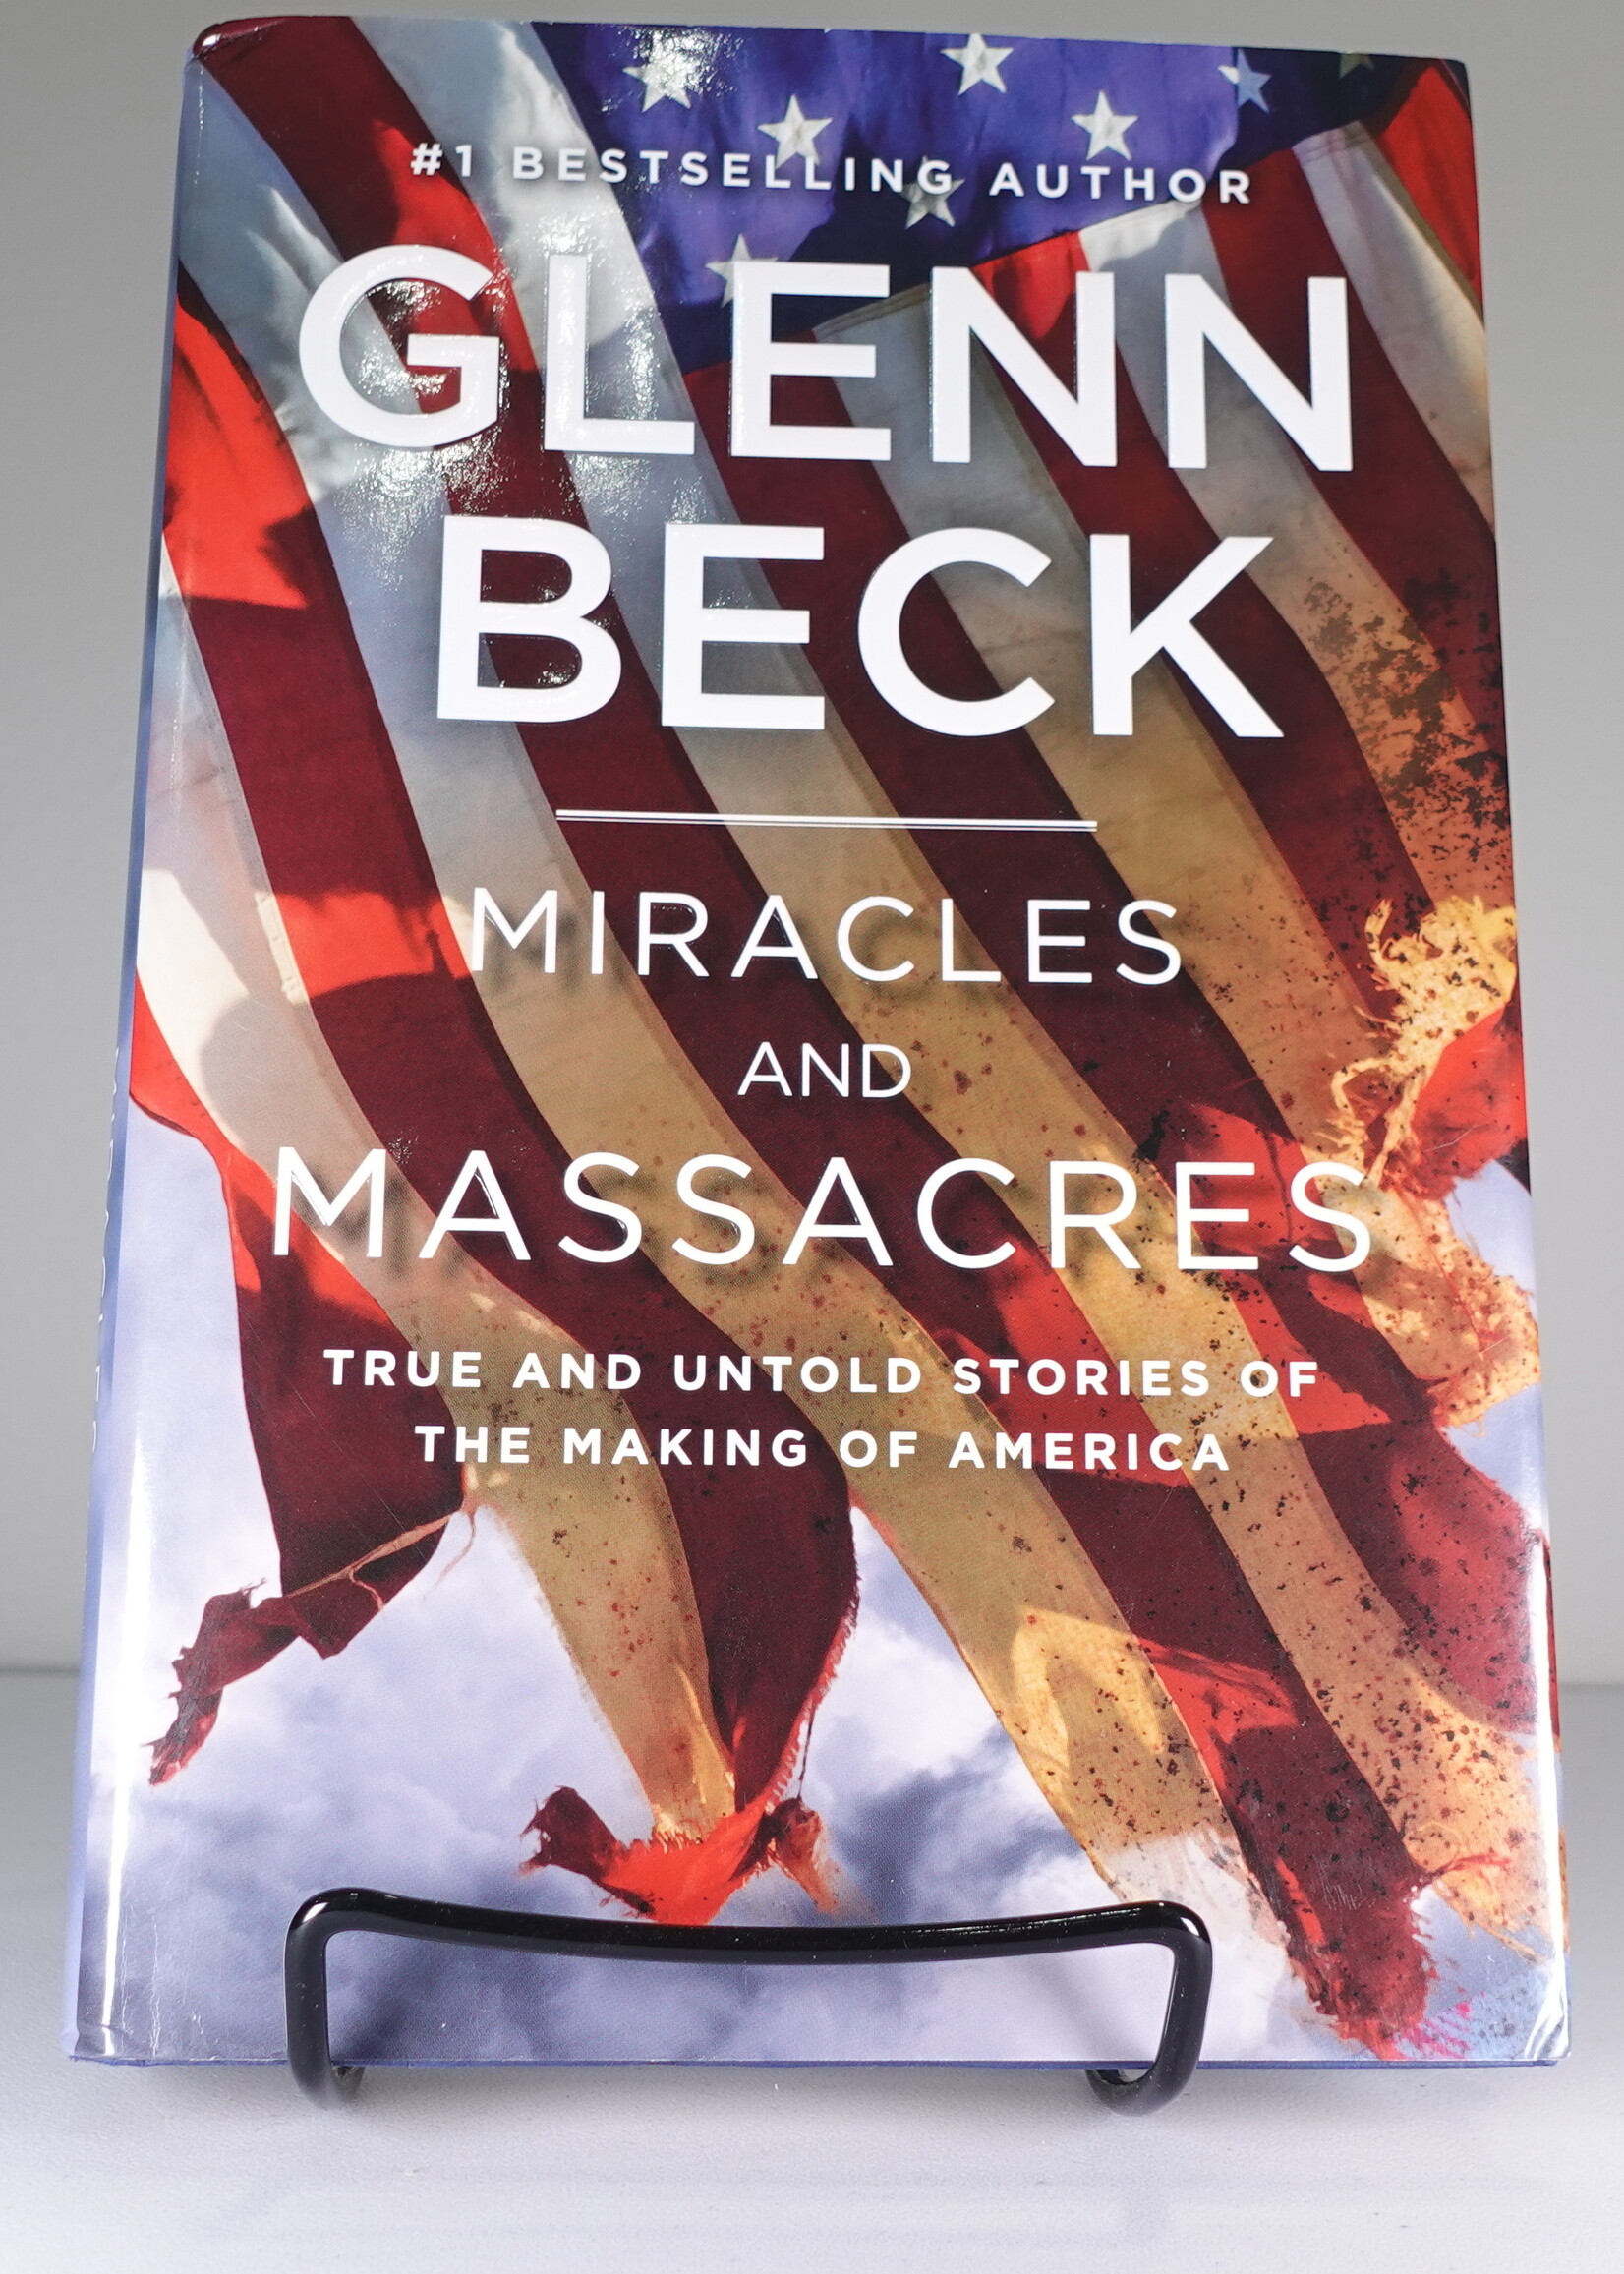 Miracles and Massacres: True and Untold Stories of the Making of America